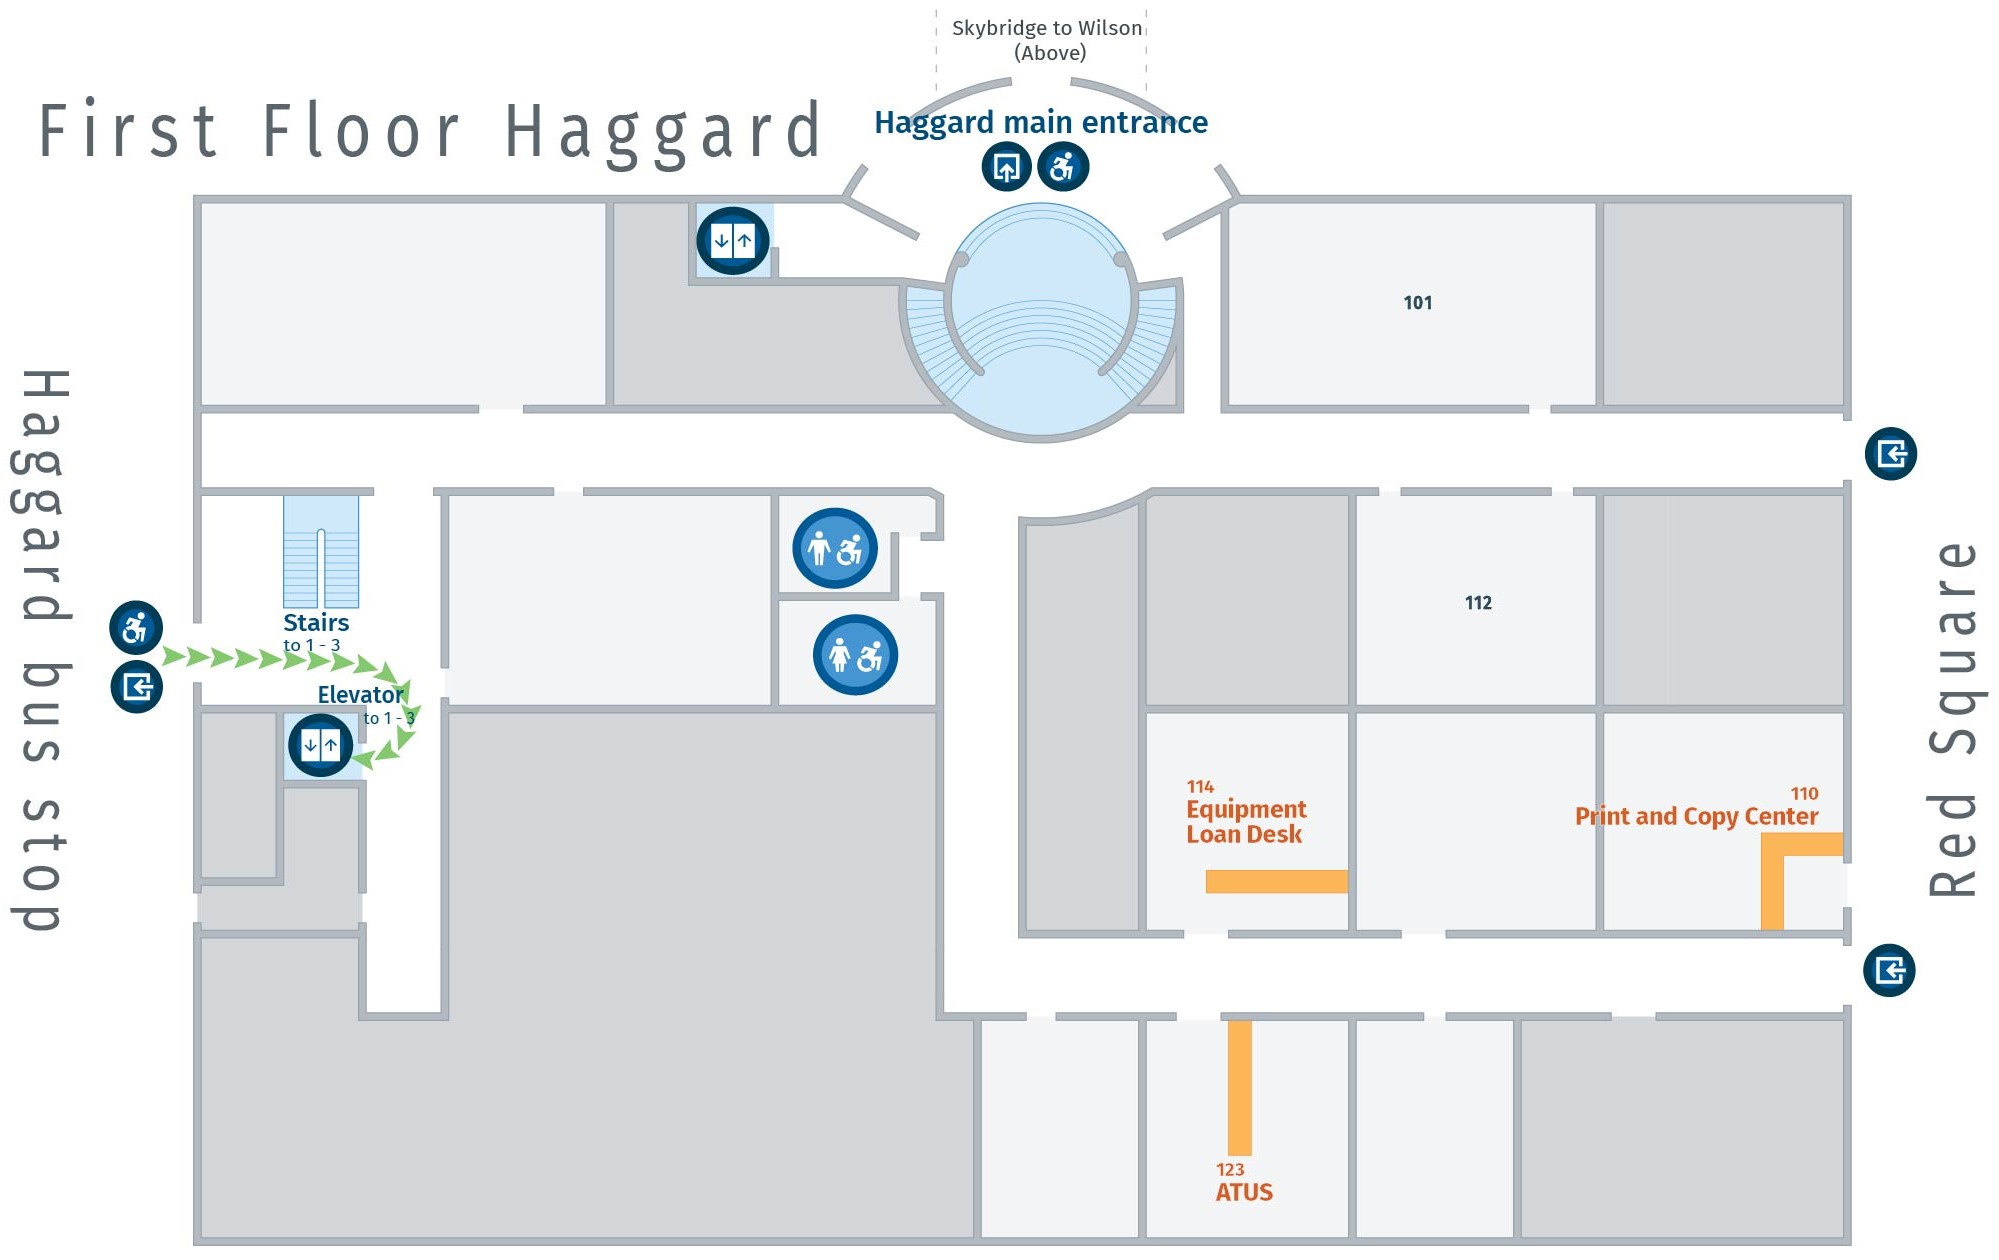 Floorplan, first floor of Haggard with path to HH elevator.